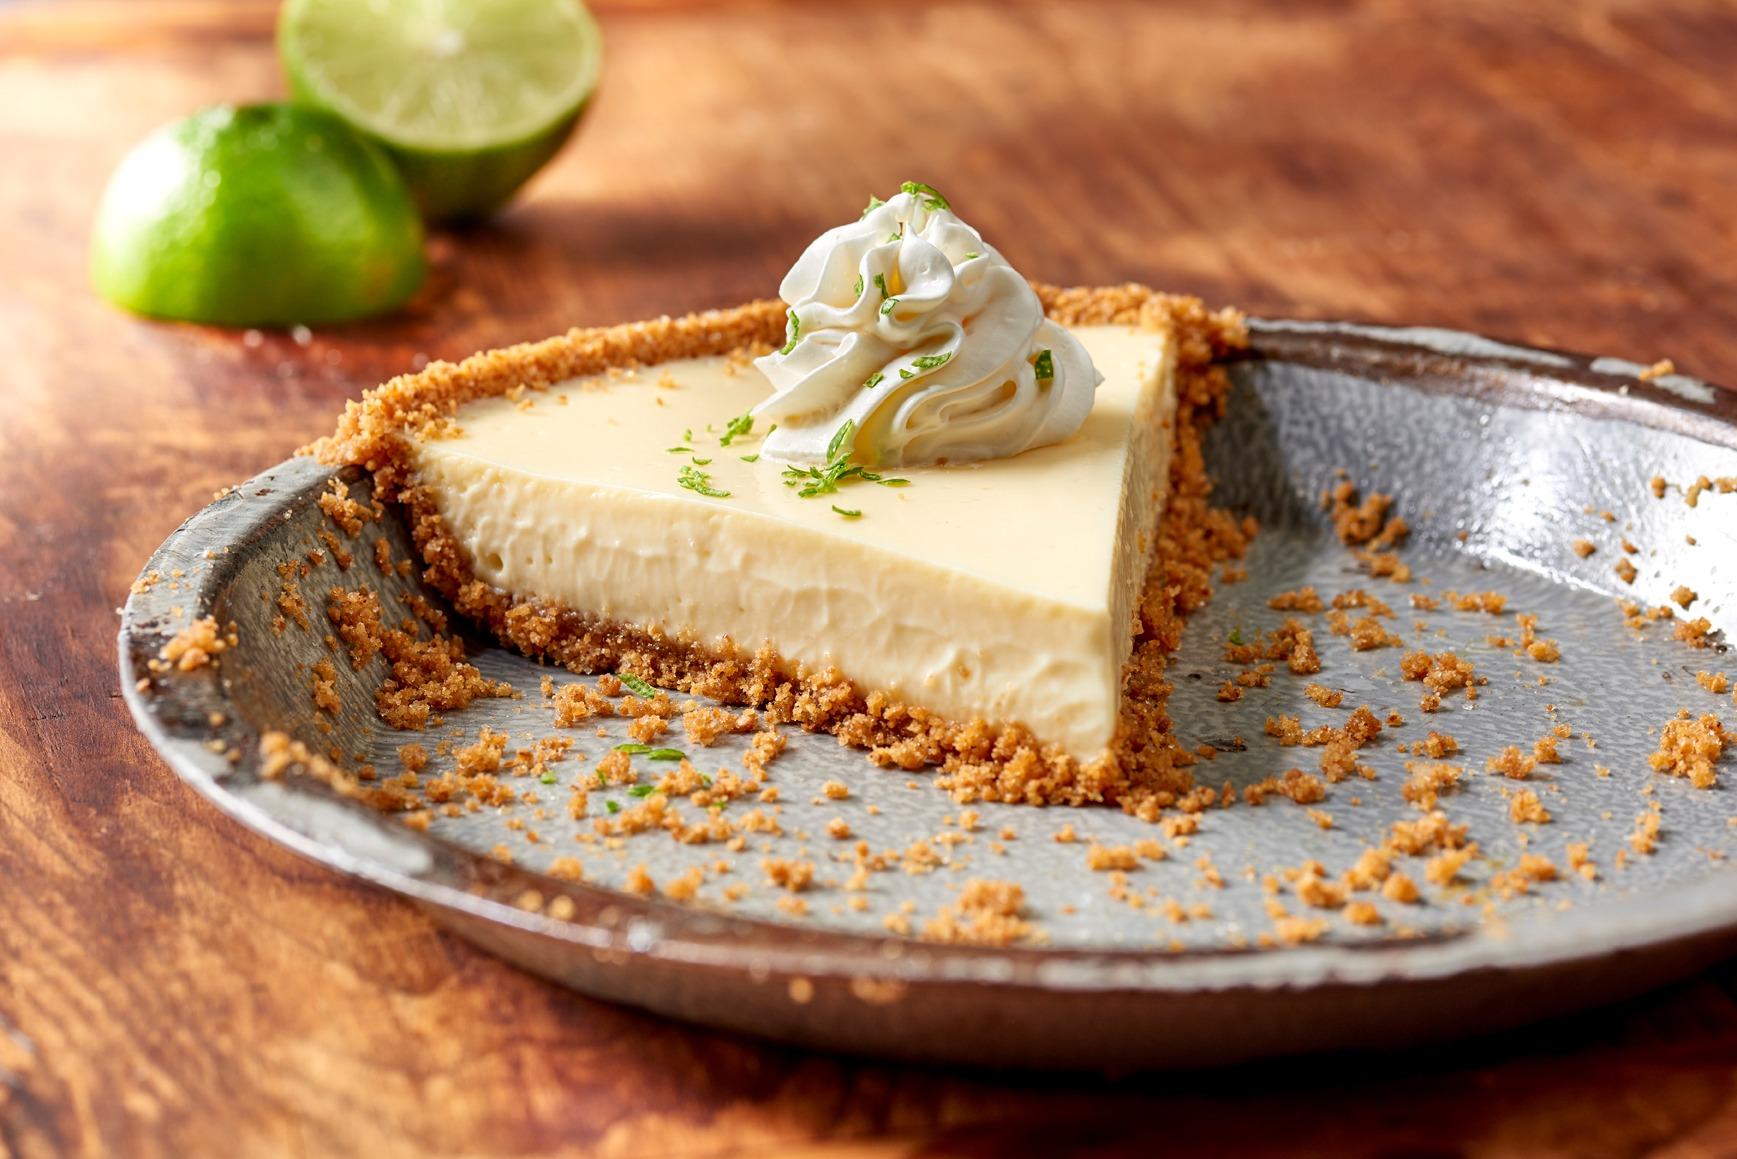 Key Lime Pie - made from scratch!